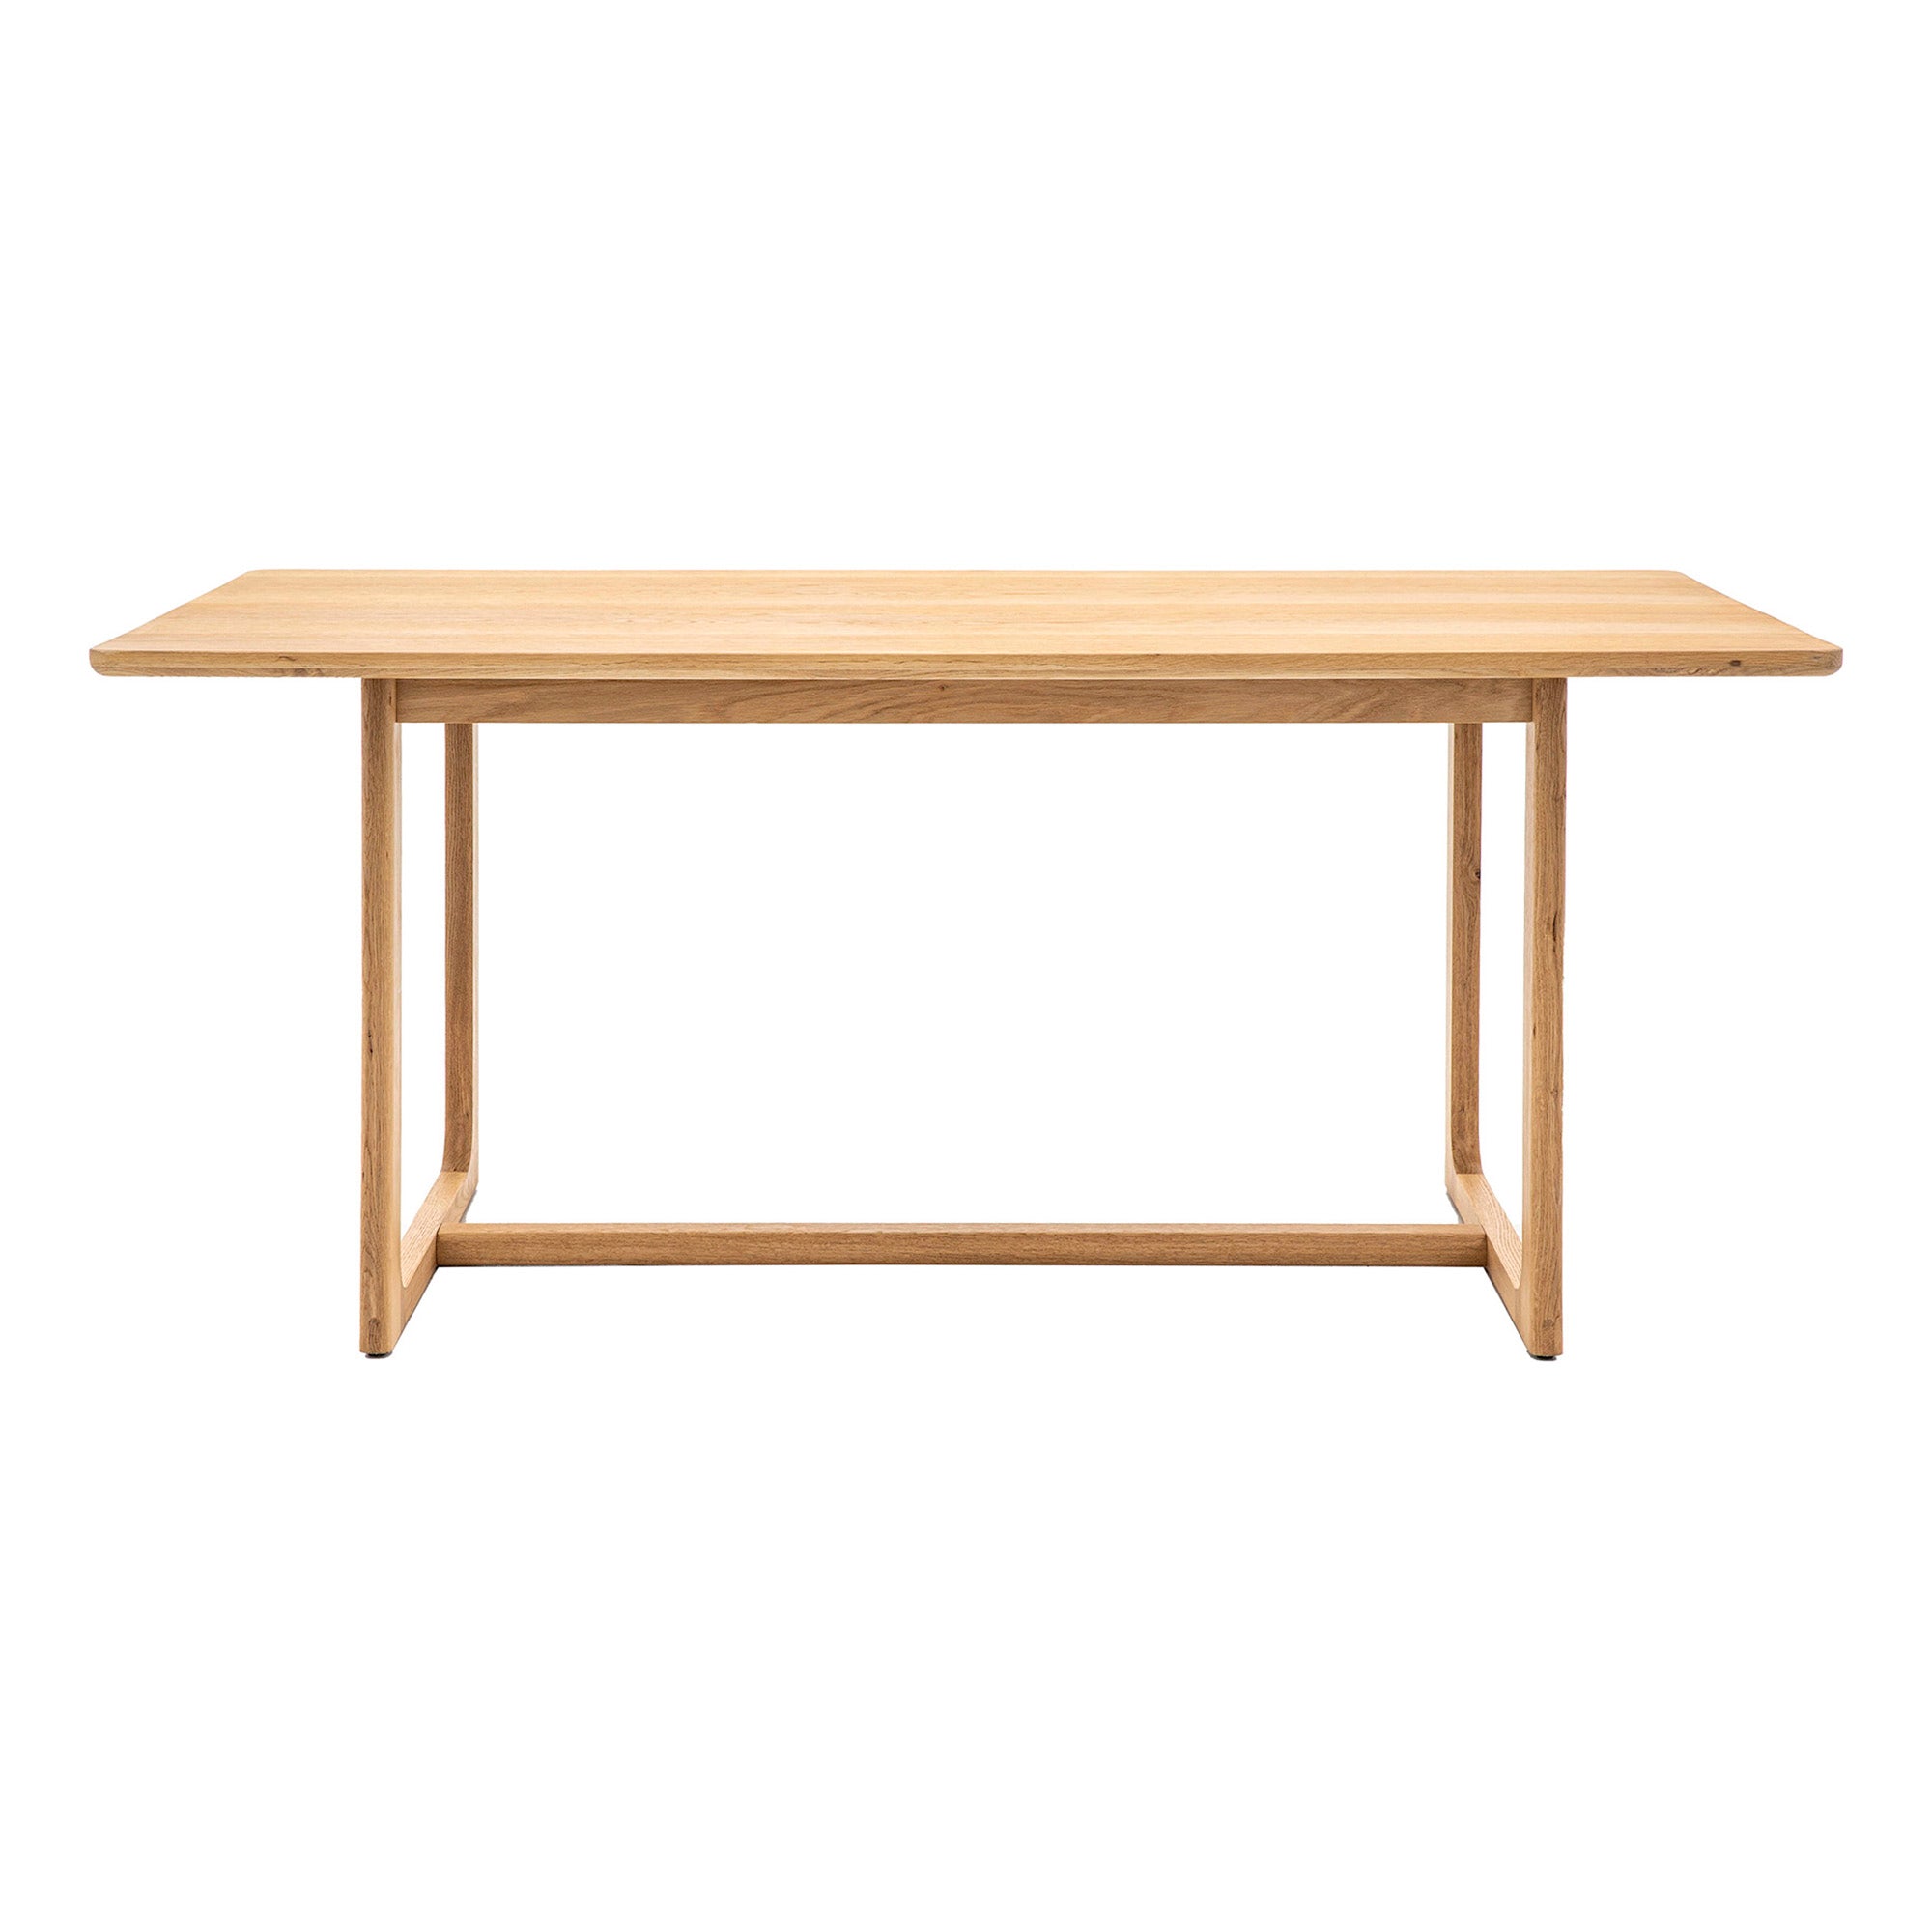 The Finest Wooden Dining Table